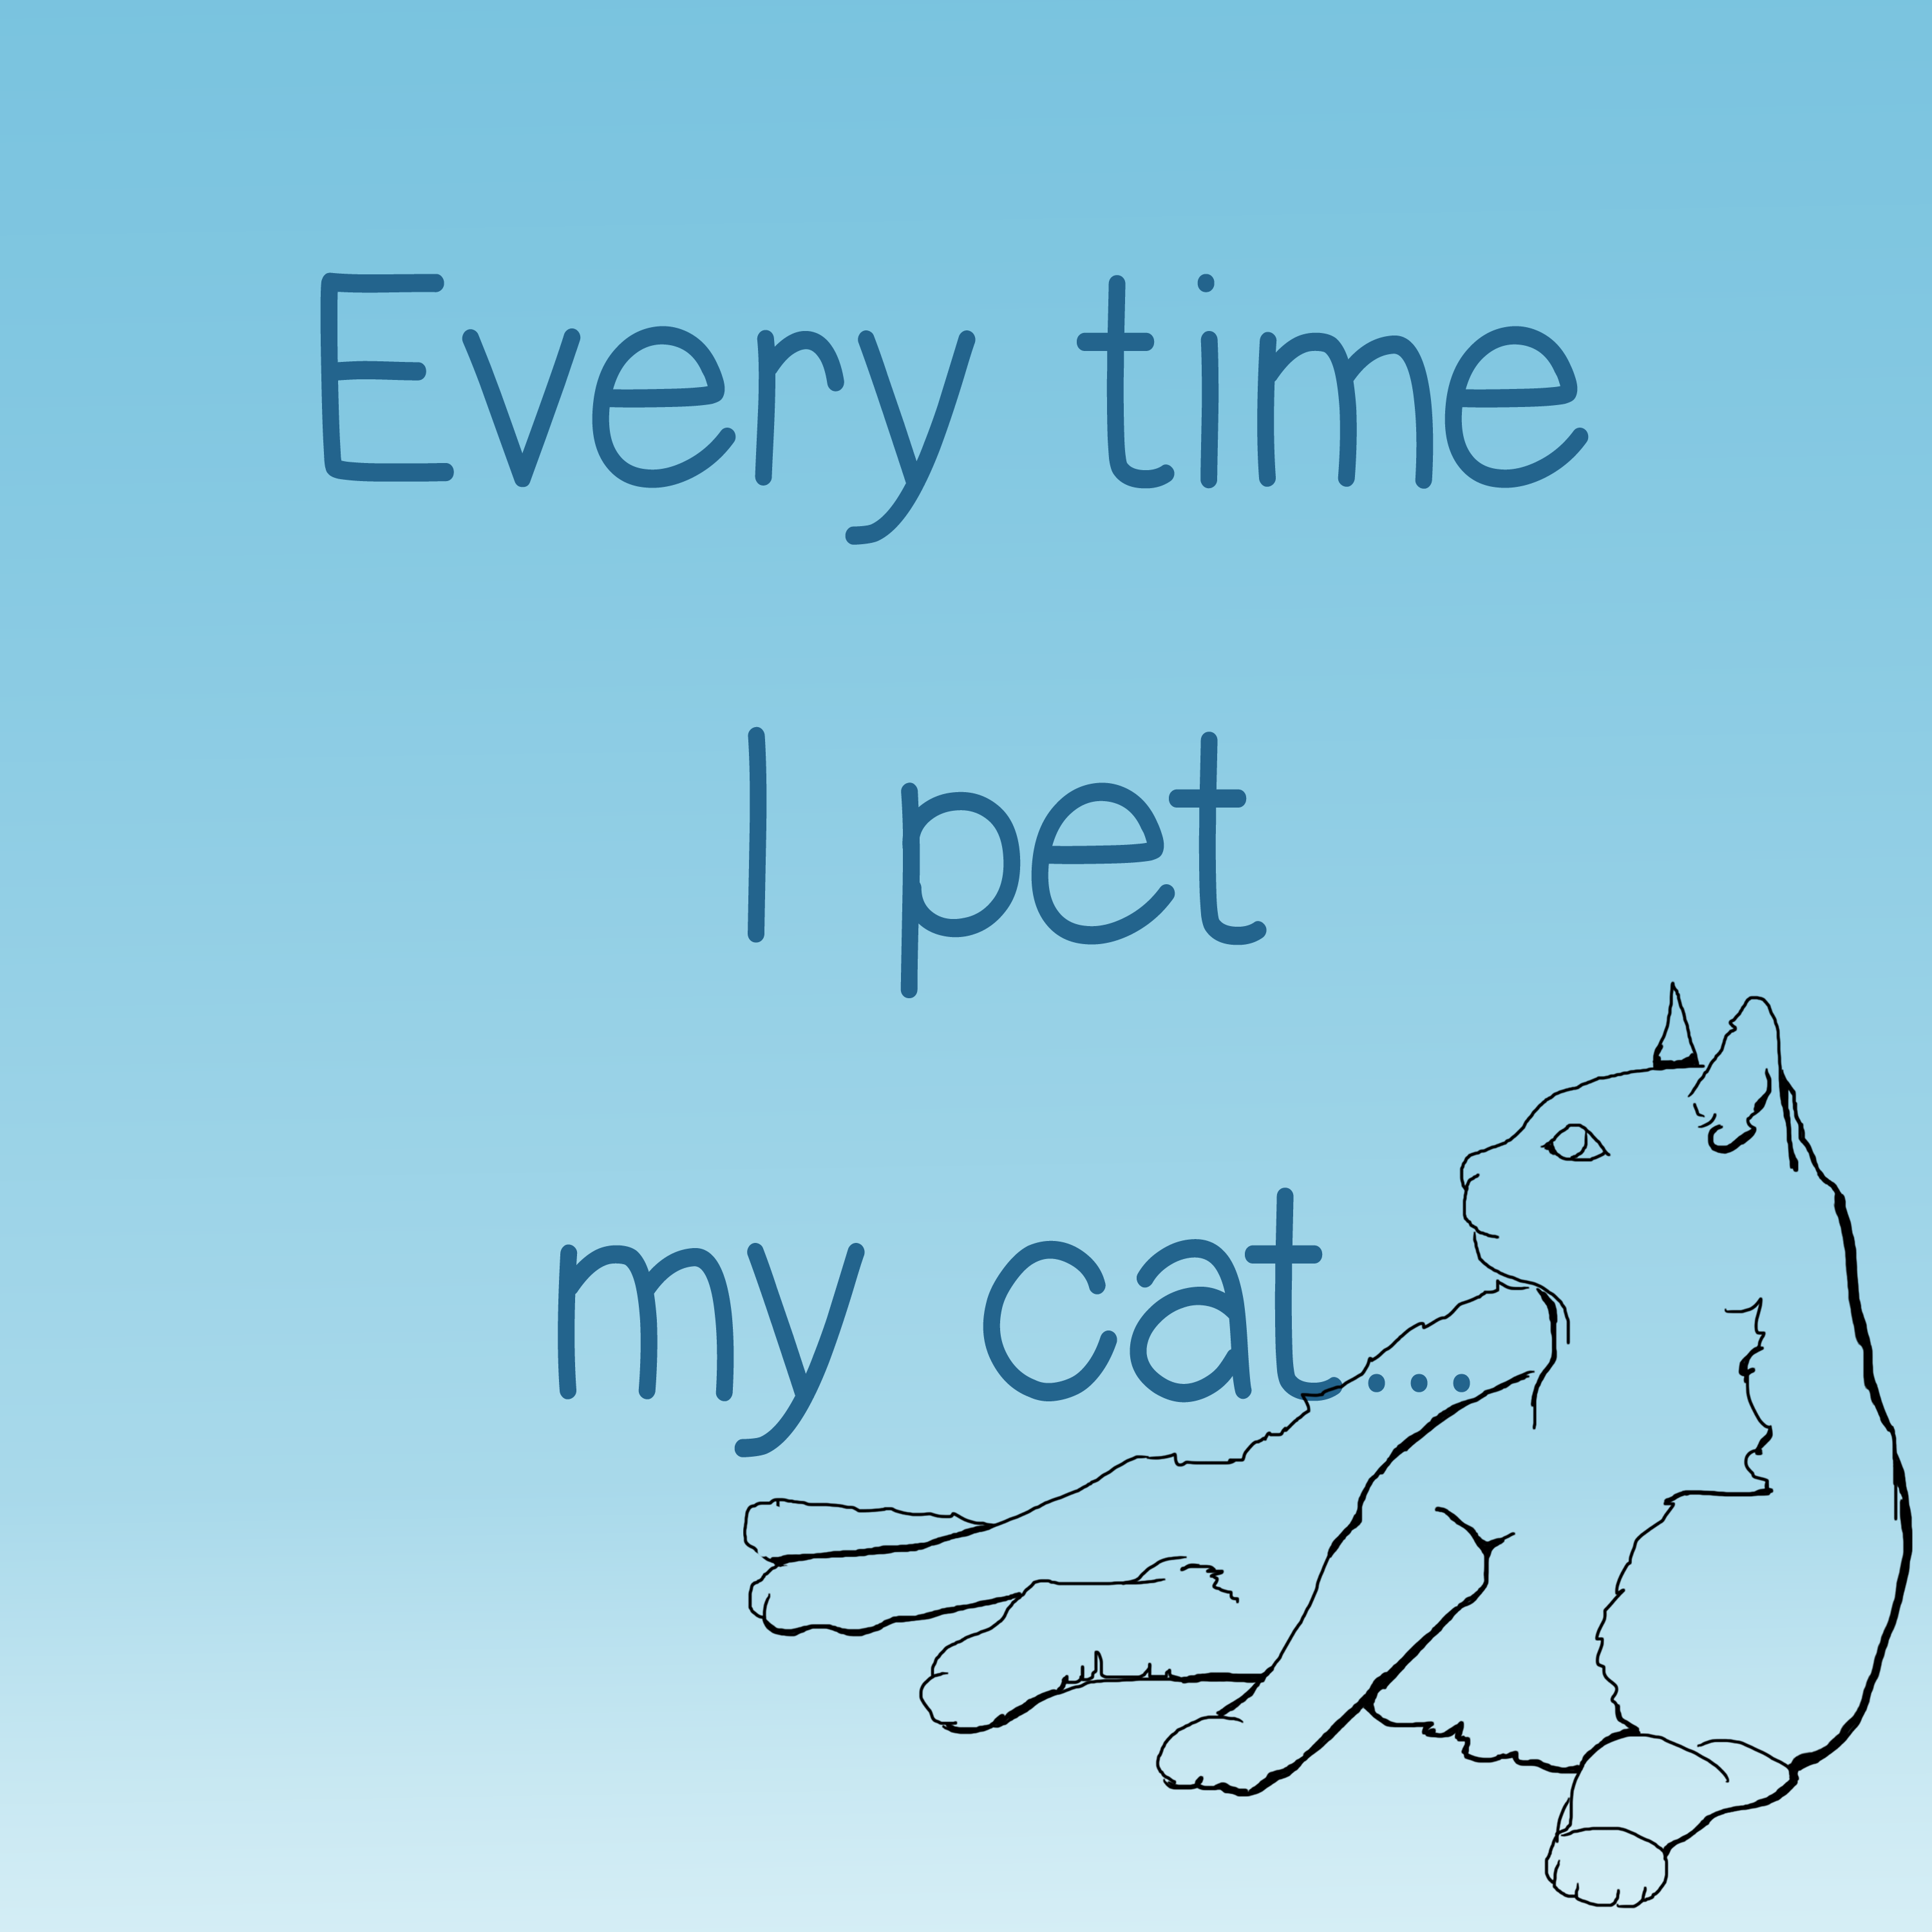 Every time I pet my cat ...